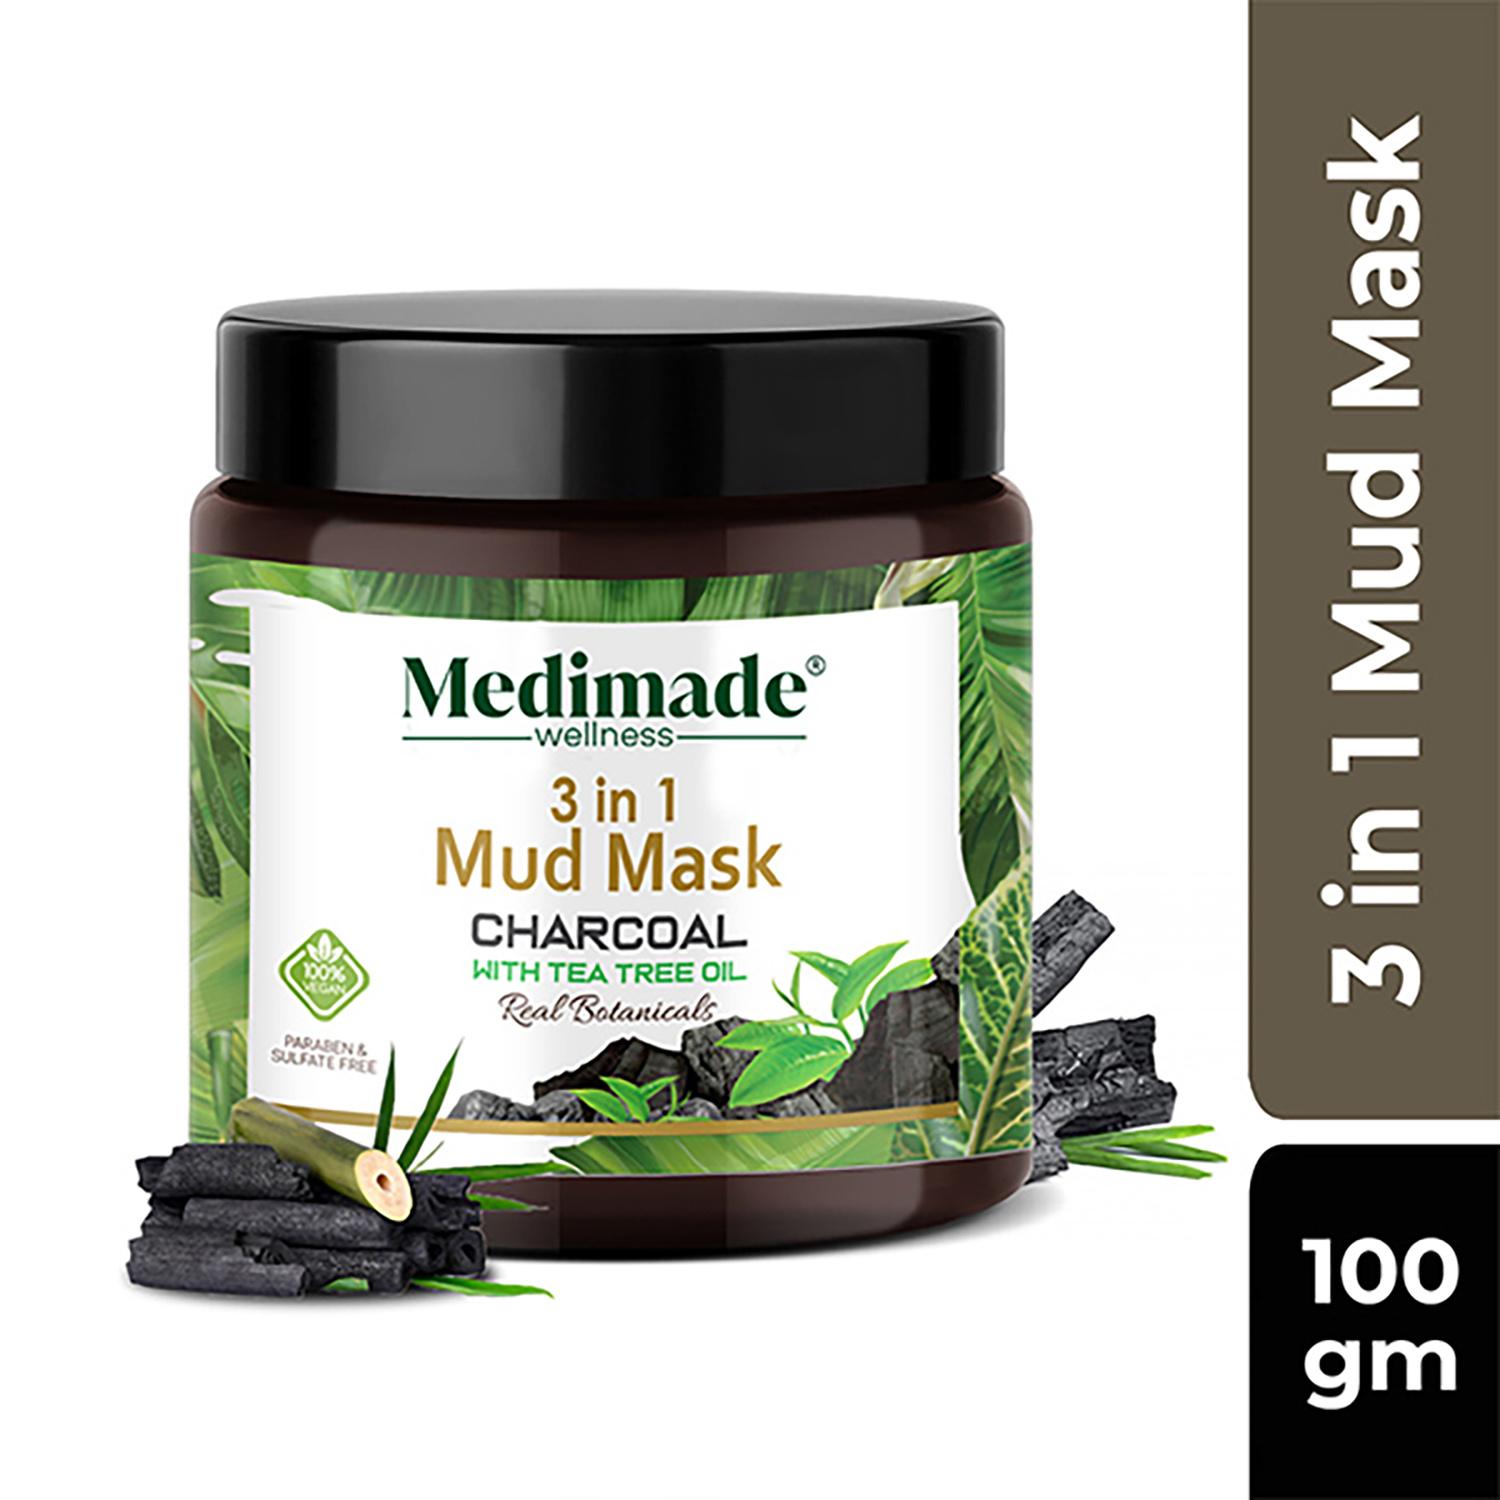 Medimade Charcoal With Tea Tree Oil 3 In 1 Mud Mask (100g)